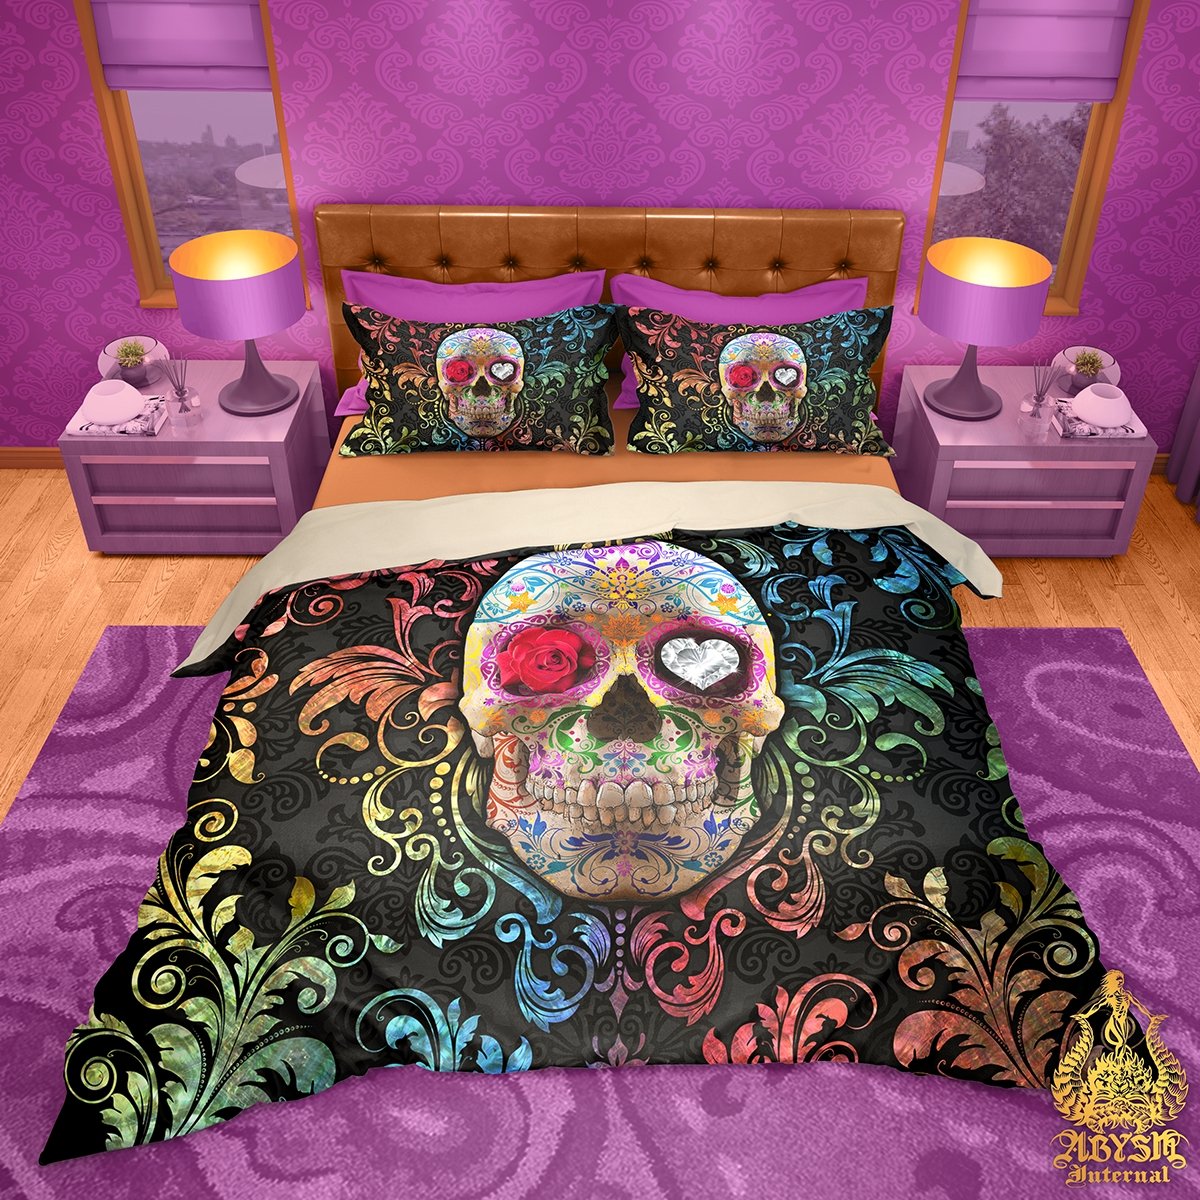 Sugar Skull Bedding Set, Comforter and Duvet, Indie Bed Cover and Bedroom Decor, King, Queen and Twin Size - Day of the Dead, Dia de los Muertos - Abysm Internal